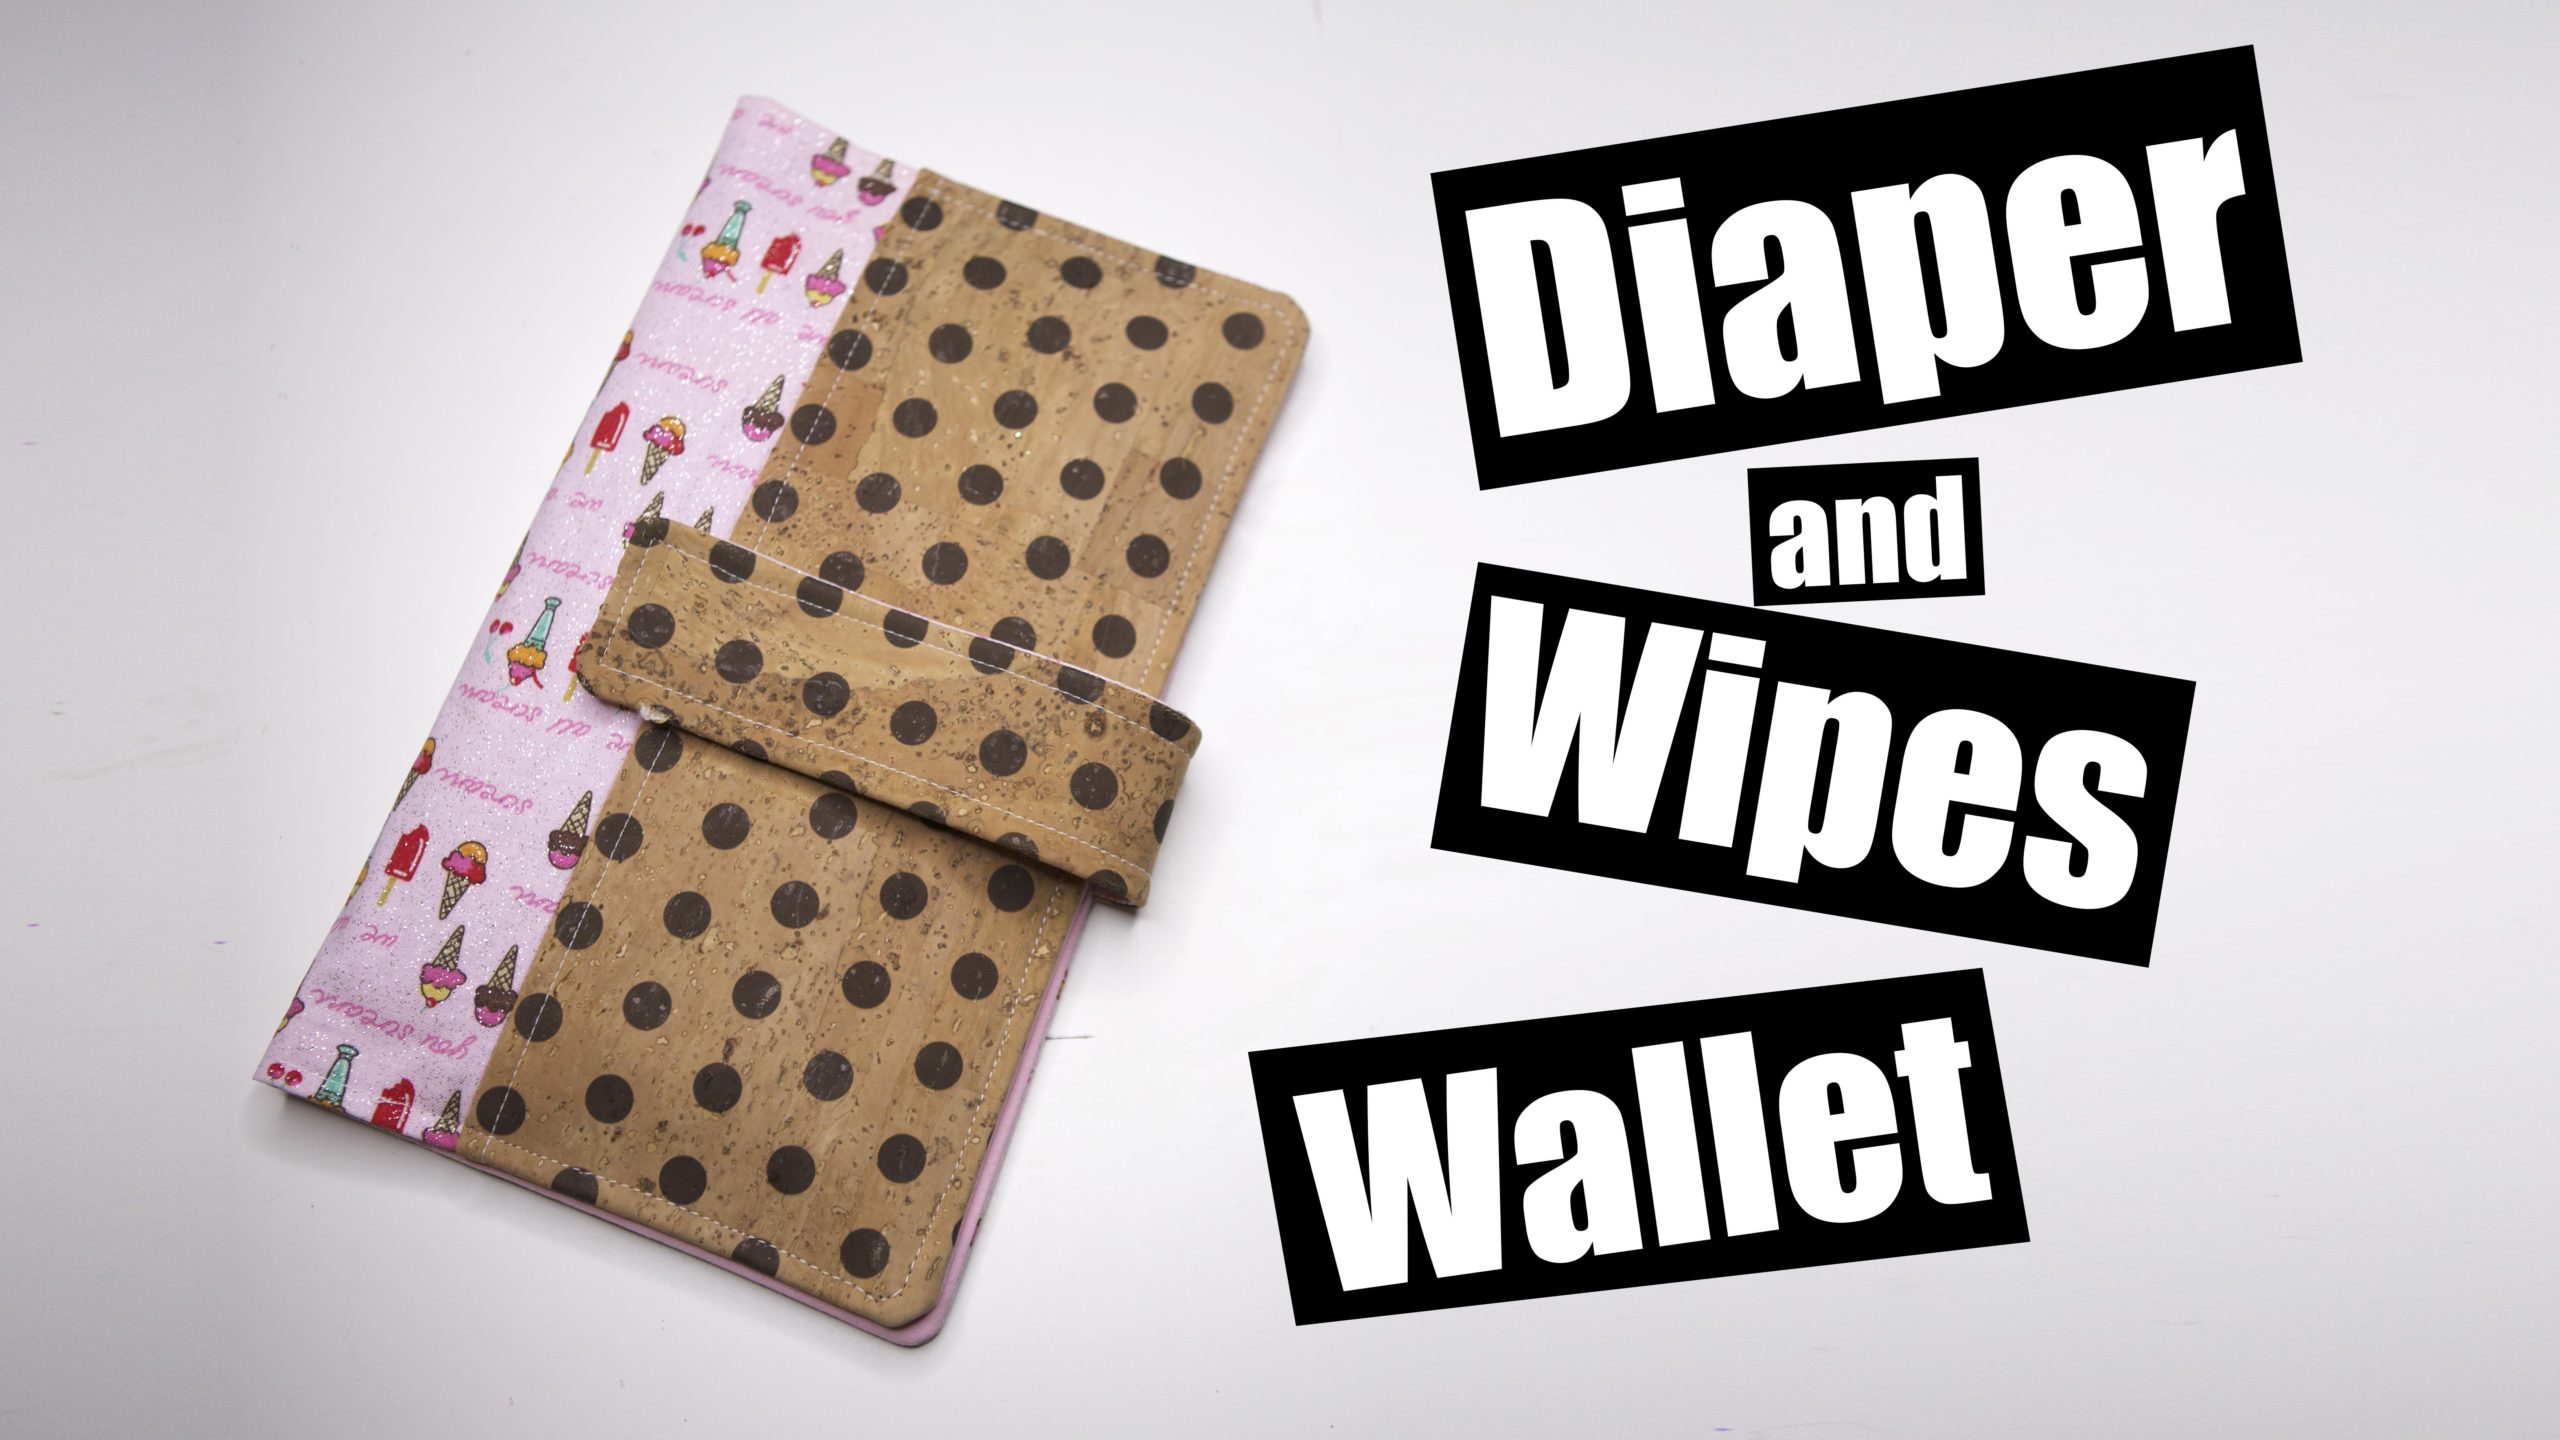 Diaper and Wipes wallet